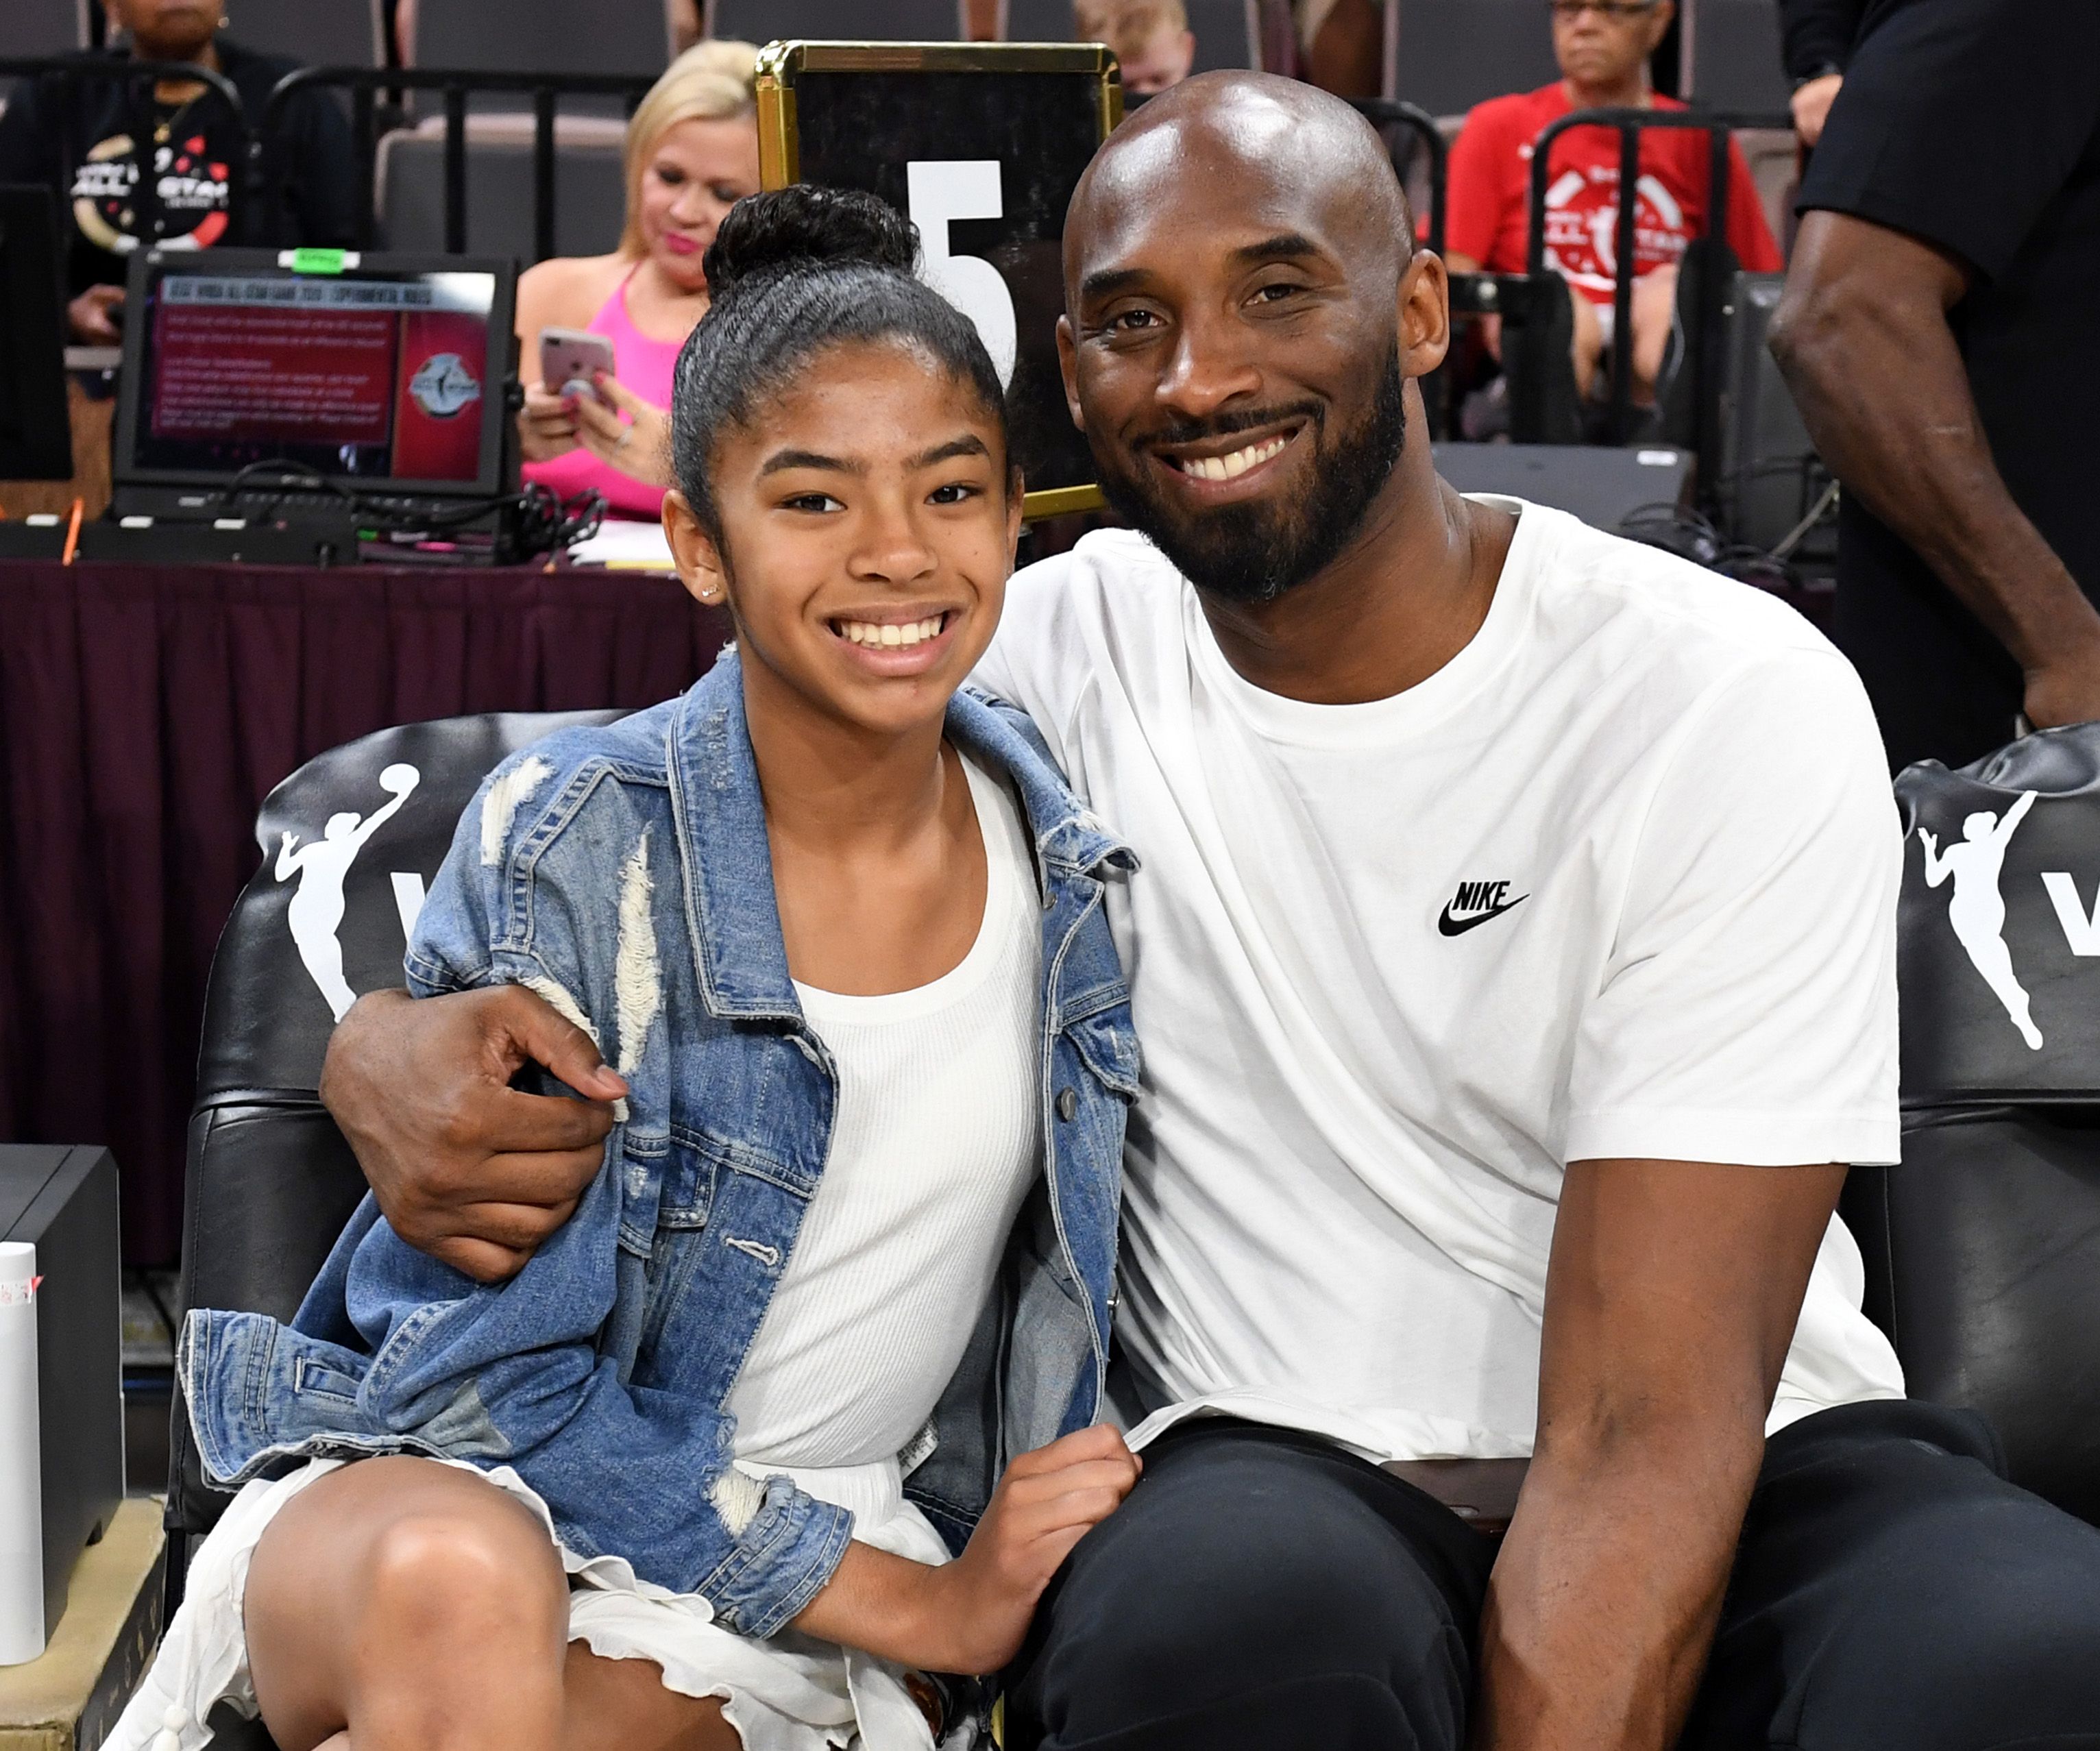 Gianna Bryant and Kobe Bryant at the WNBA All-Star Game 2019 at the Mandalay Bay Events Center on July 27, 2019 | Photo: Getty images